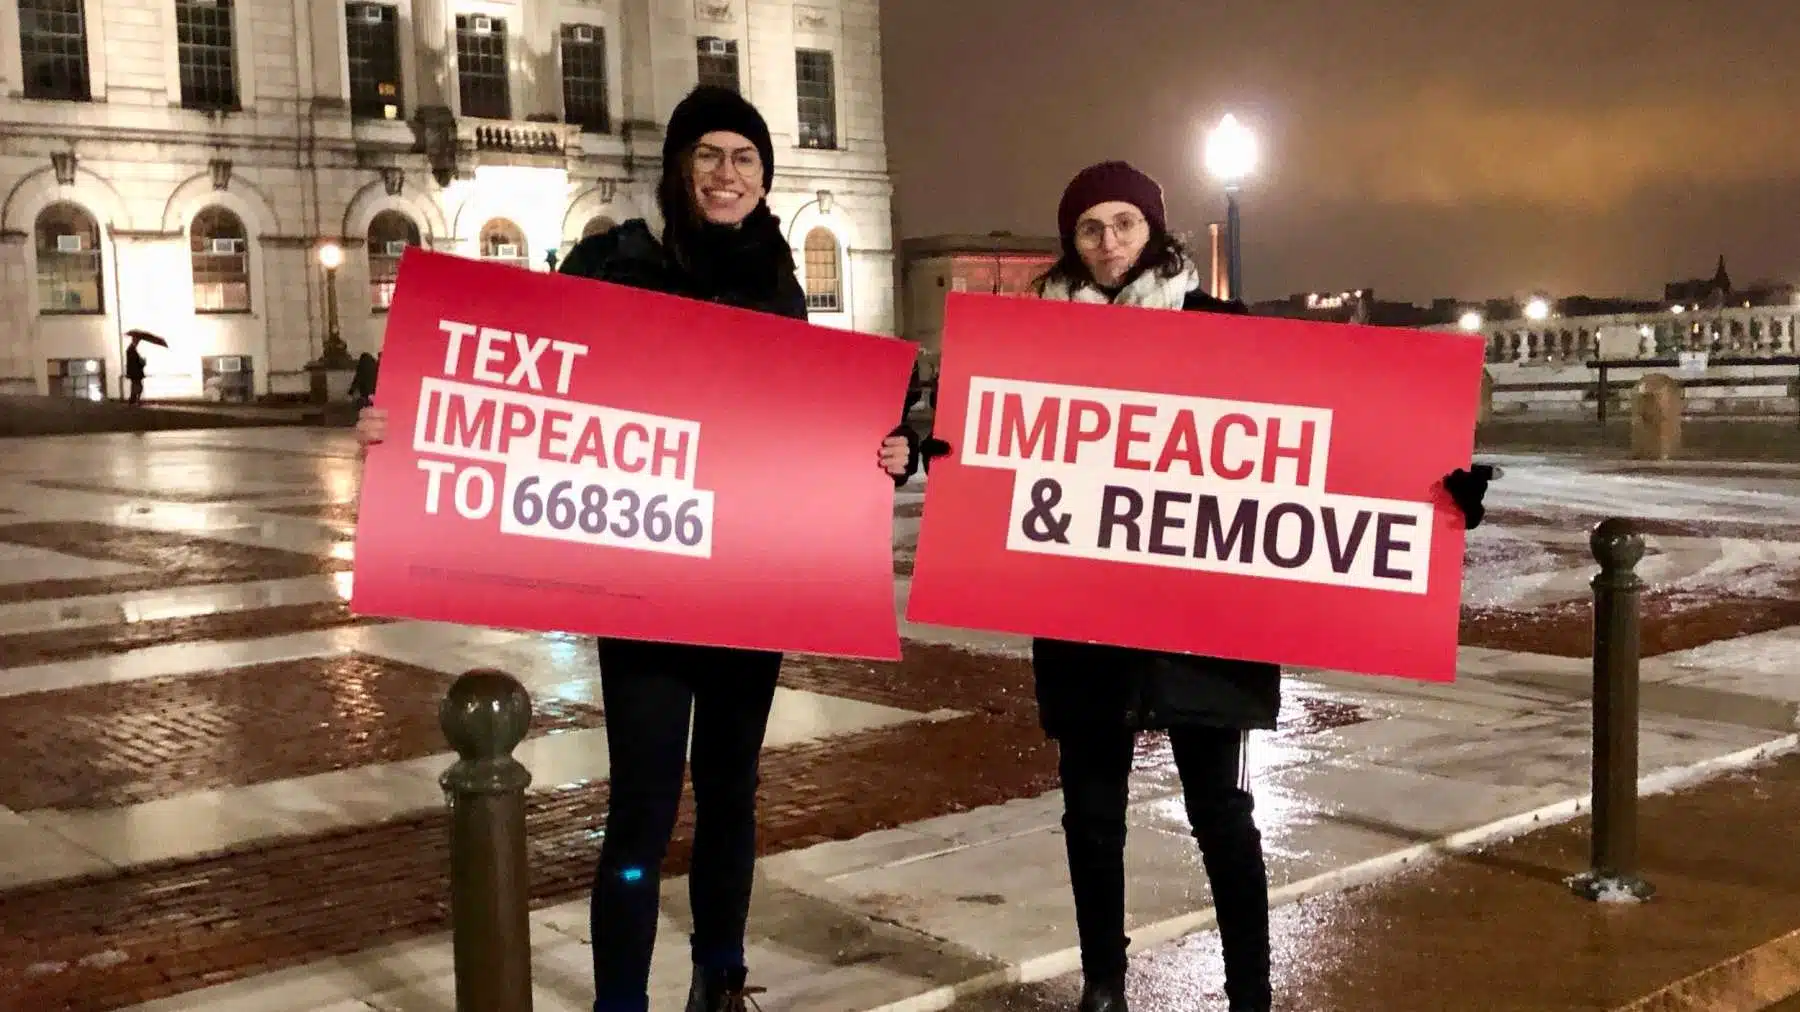 Rally to support the impeachment of Trump draws hundreds to Rhode Island State House